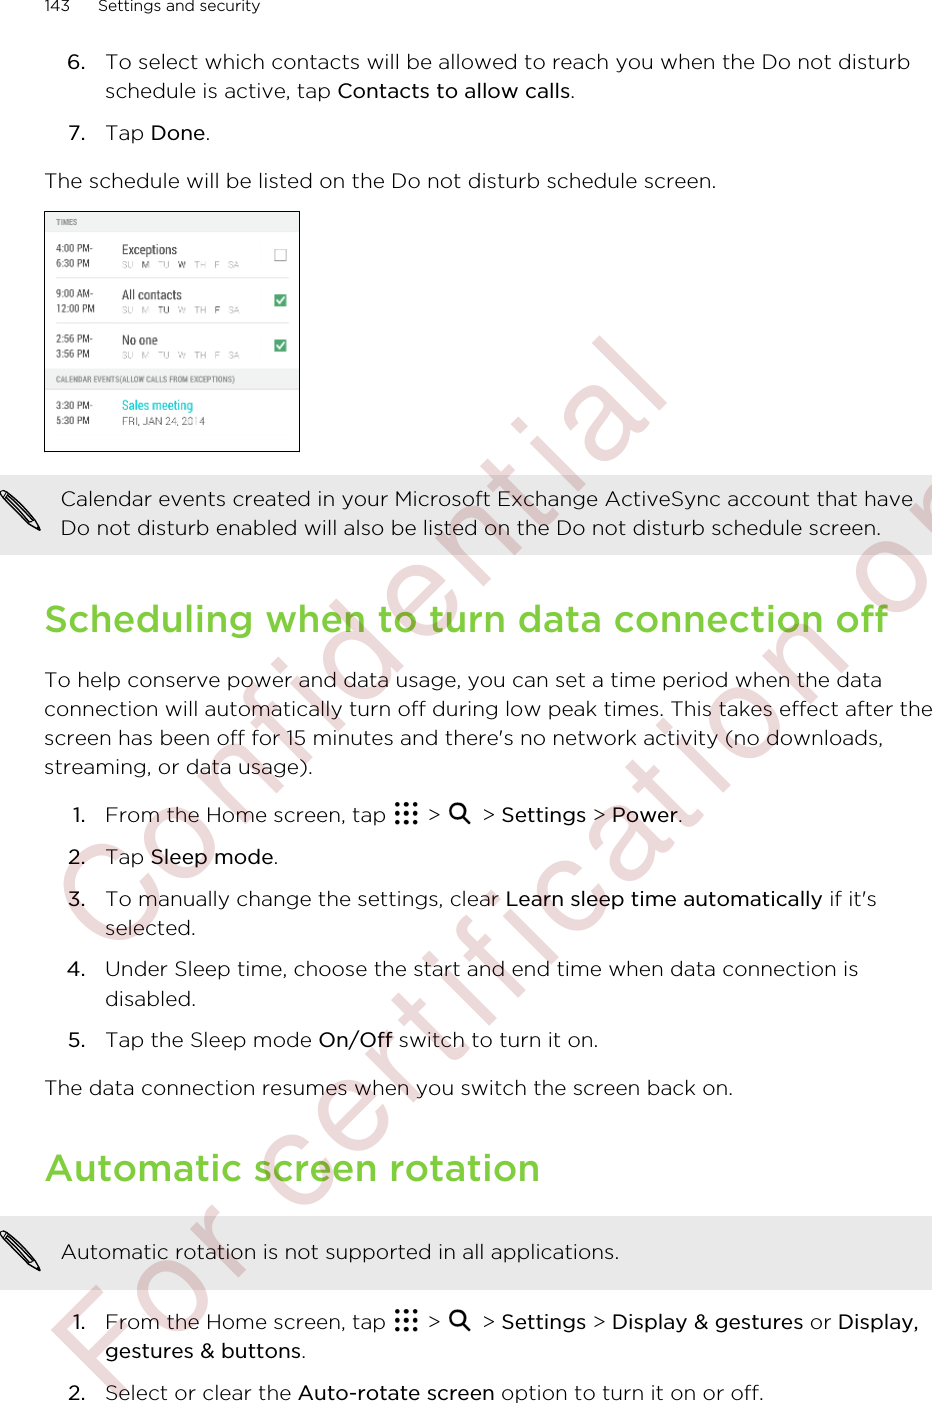 6. To select which contacts will be allowed to reach you when the Do not disturbschedule is active, tap Contacts to allow calls.7. Tap Done.The schedule will be listed on the Do not disturb schedule screen.Calendar events created in your Microsoft Exchange ActiveSync account that haveDo not disturb enabled will also be listed on the Do not disturb schedule screen.Scheduling when to turn data connection offTo help conserve power and data usage, you can set a time period when the dataconnection will automatically turn off during low peak times. This takes effect after thescreen has been off for 15 minutes and there&apos;s no network activity (no downloads,streaming, or data usage).1. From the Home screen, tap   &gt;   &gt; Settings &gt; Power.2. Tap Sleep mode.3. To manually change the settings, clear Learn sleep time automatically if it&apos;sselected.4. Under Sleep time, choose the start and end time when data connection isdisabled.5. Tap the Sleep mode On/Off switch to turn it on.The data connection resumes when you switch the screen back on.Automatic screen rotationAutomatic rotation is not supported in all applications.1. From the Home screen, tap   &gt;   &gt; Settings &gt; Display &amp; gestures or Display,gestures &amp; buttons.2. Select or clear the Auto-rotate screen option to turn it on or off.143 Settings and security        Confidential  For certification only